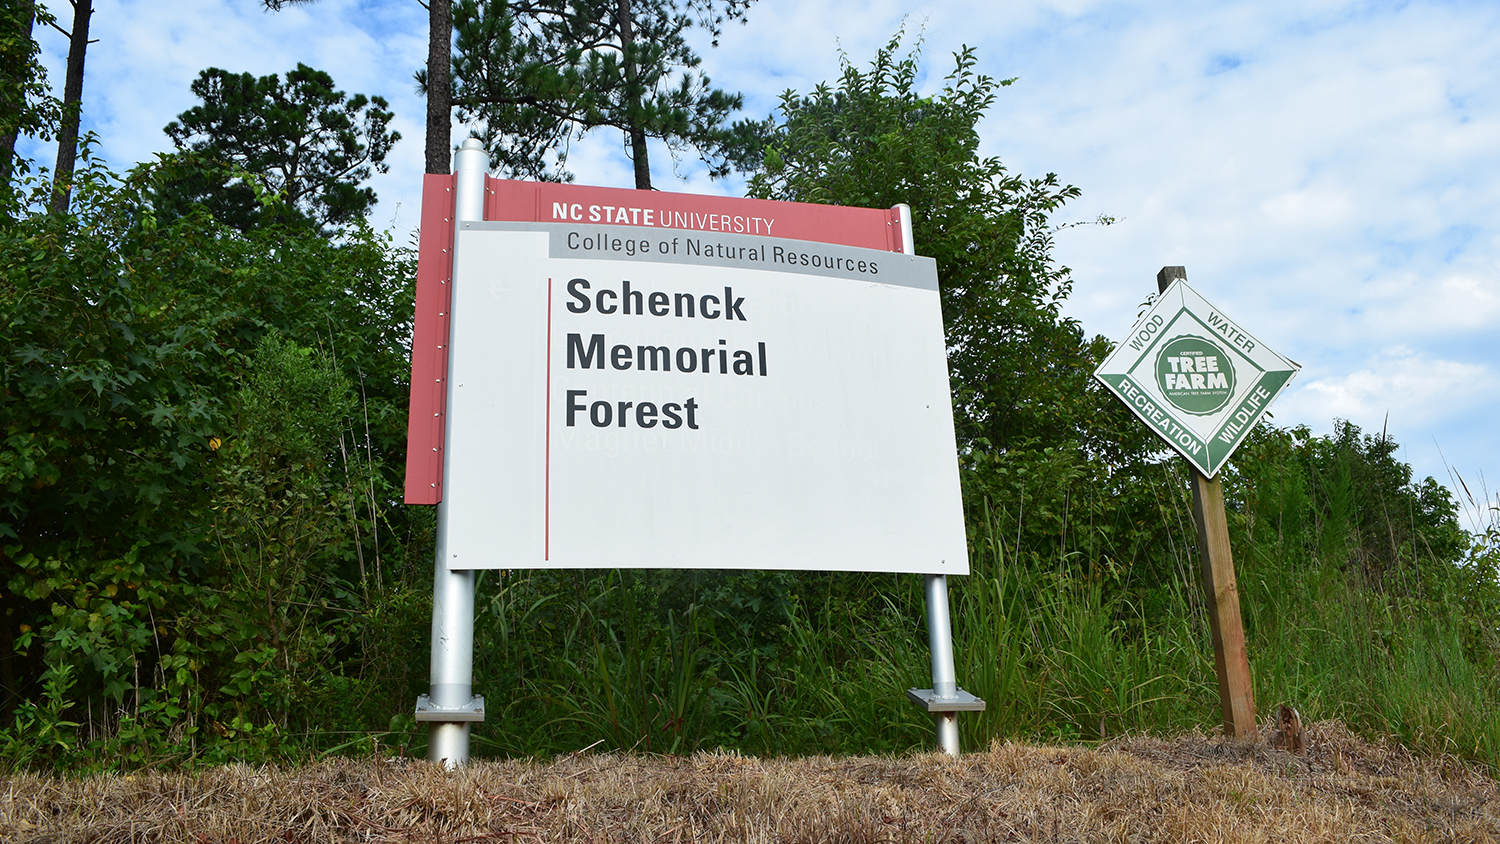 Schenck Memorial Forest - A Forest Runs Through It - College of Natural Resources News - NC State University